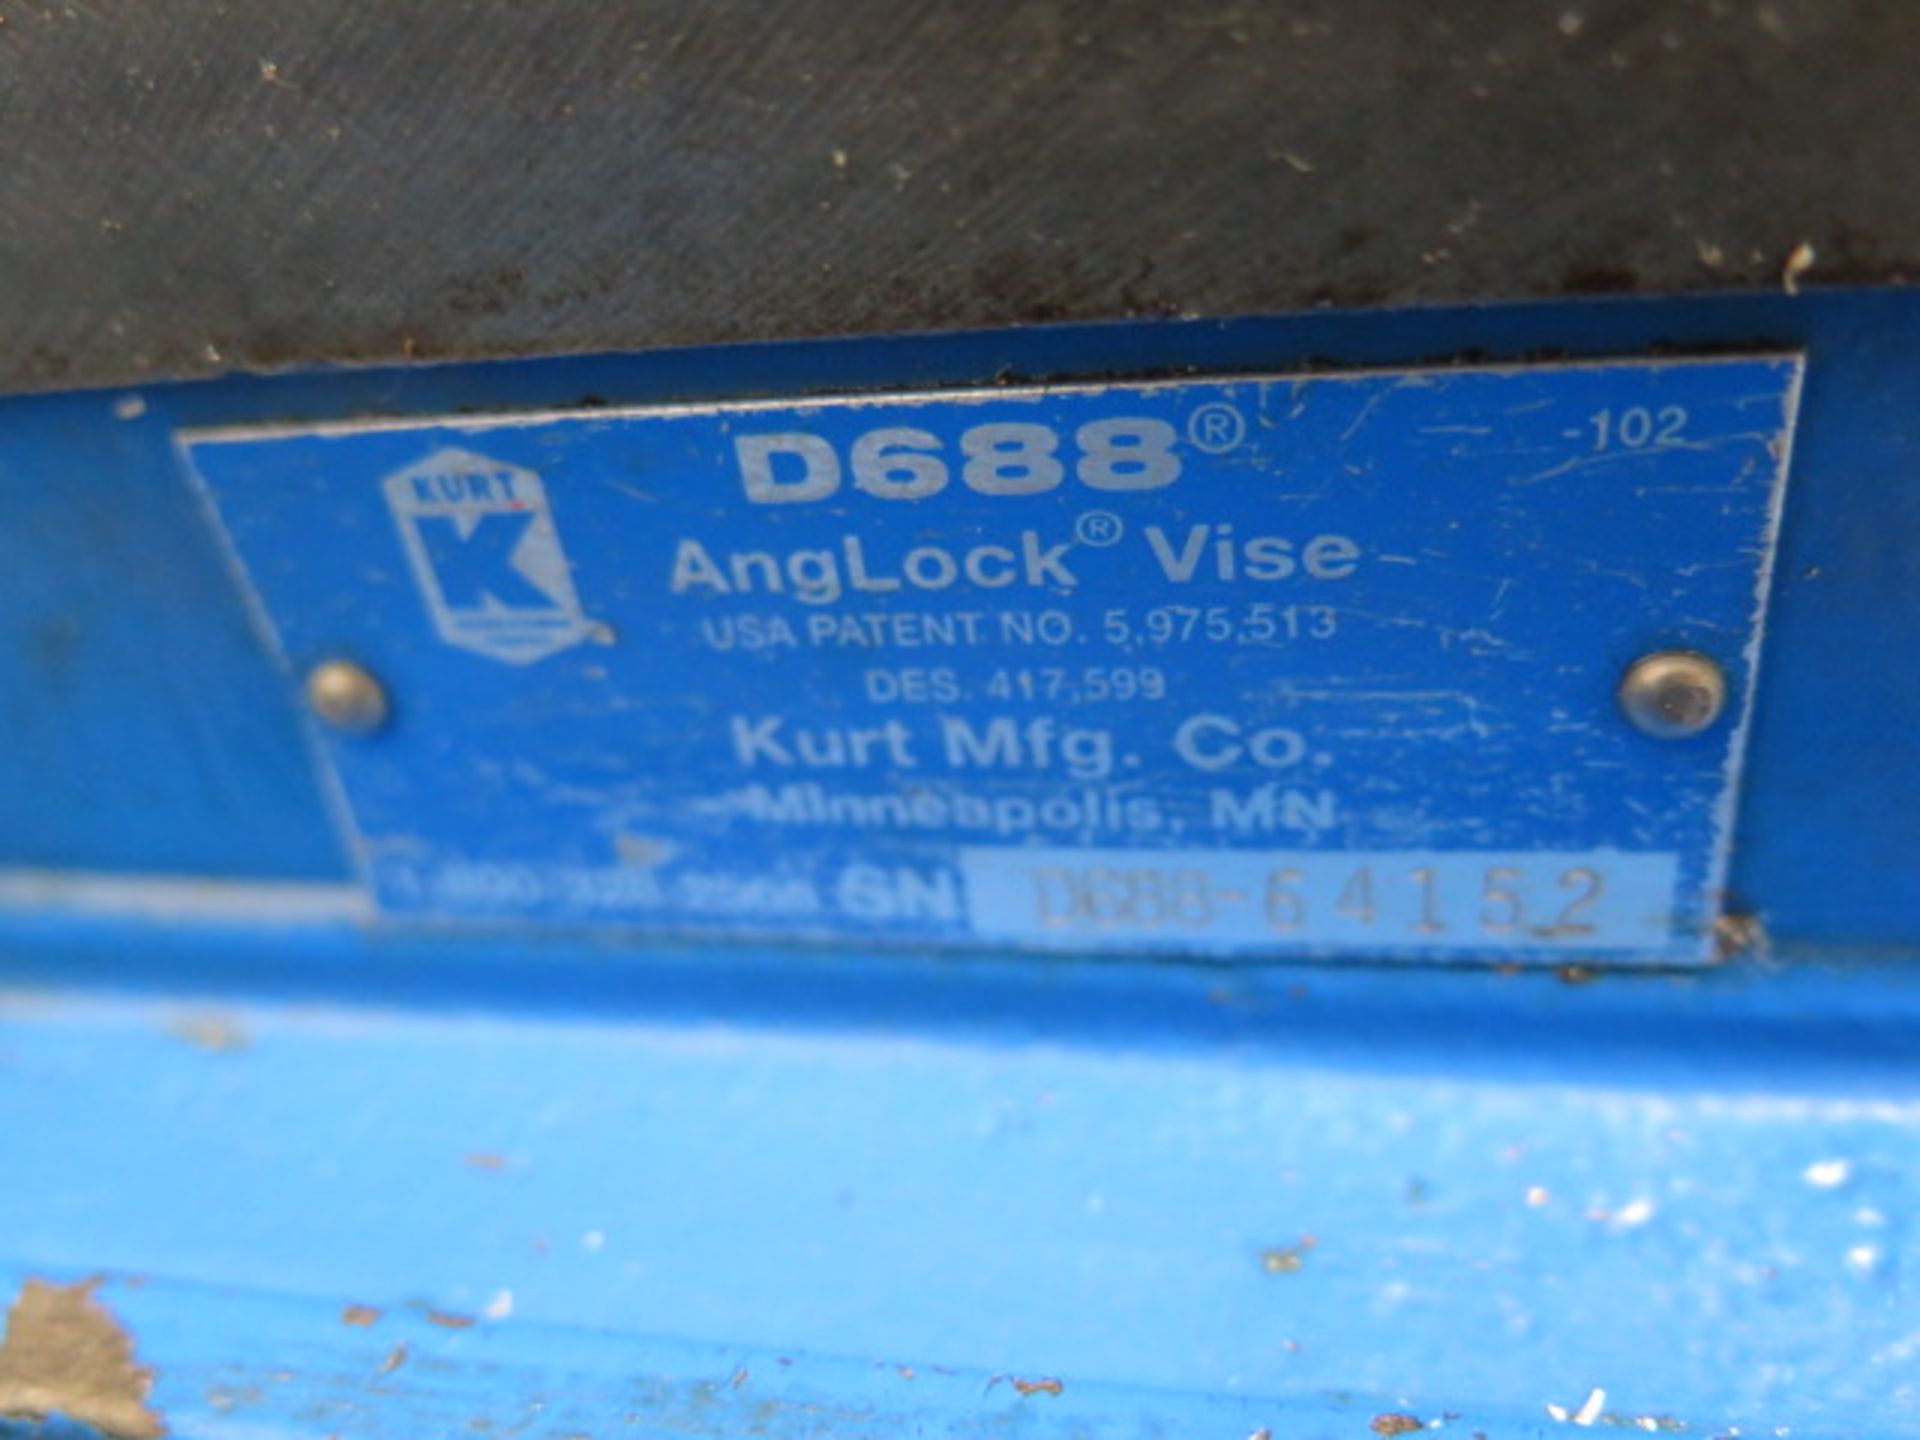 Kurt D688 6” Angle-Lock Vise (Second Location) (SOLD AS-IS - NO WARRANTY) - Image 4 of 4